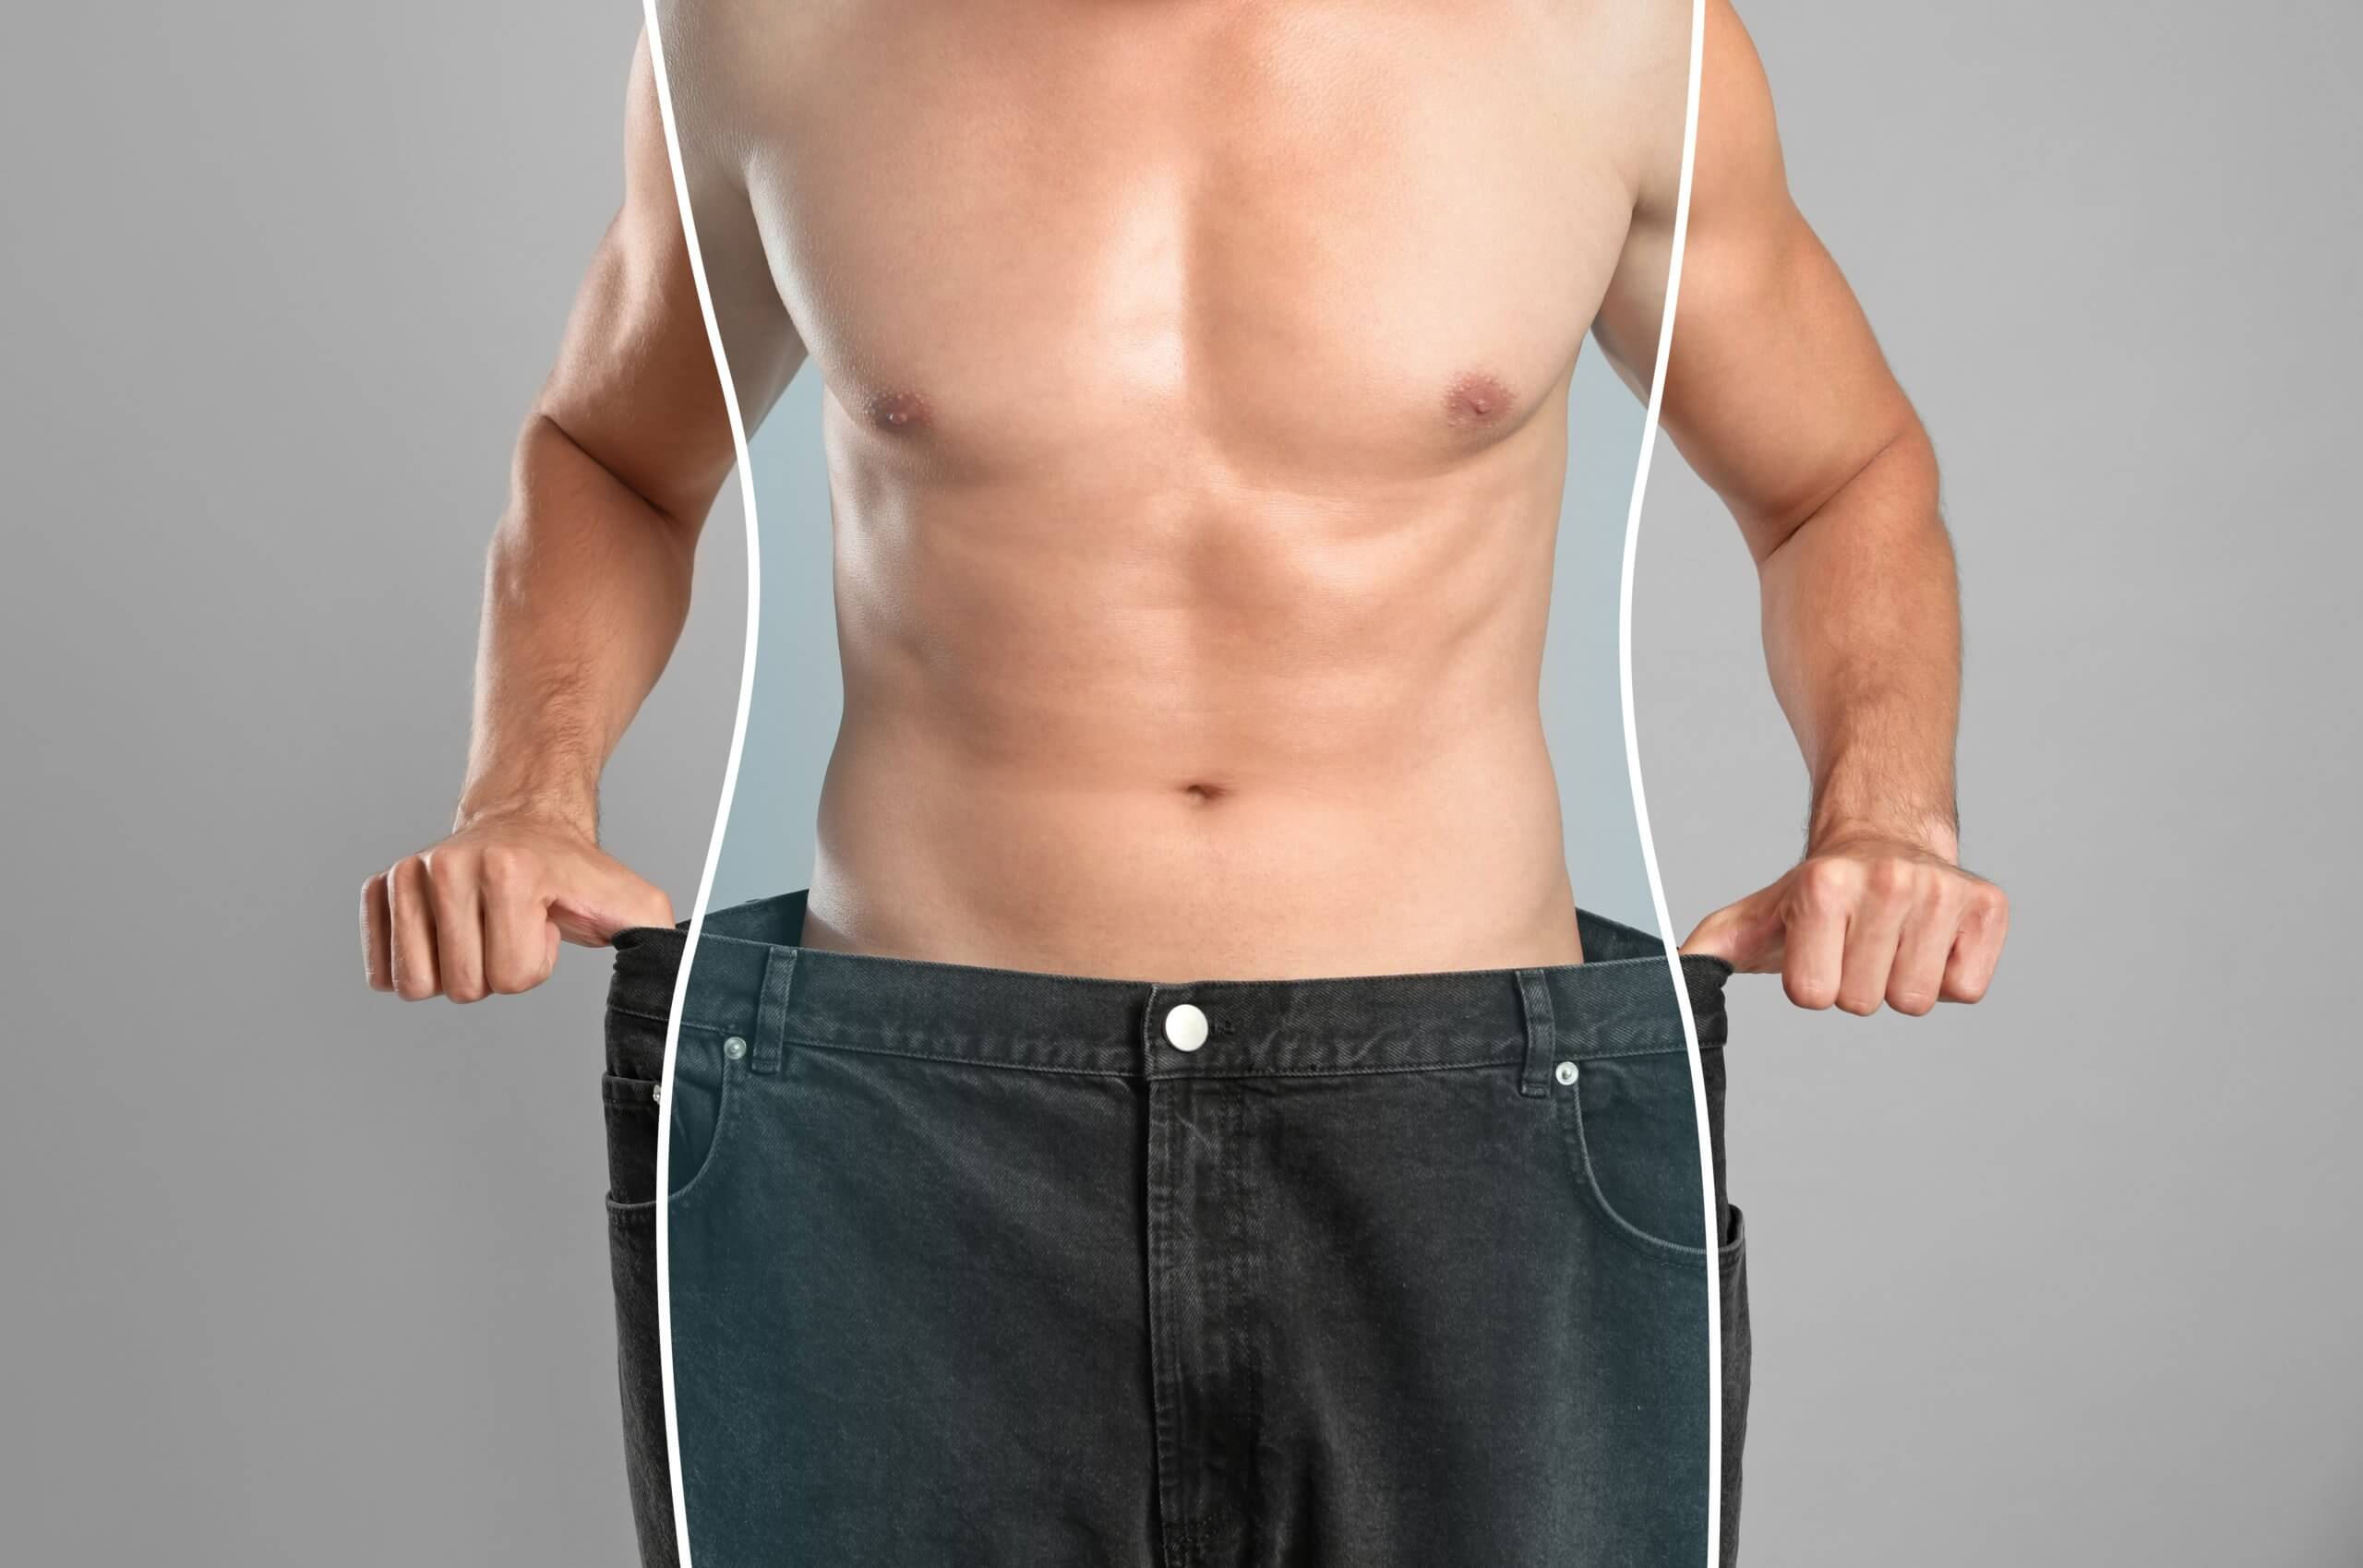 Body Contouring For Men Popular Procedures And Trends